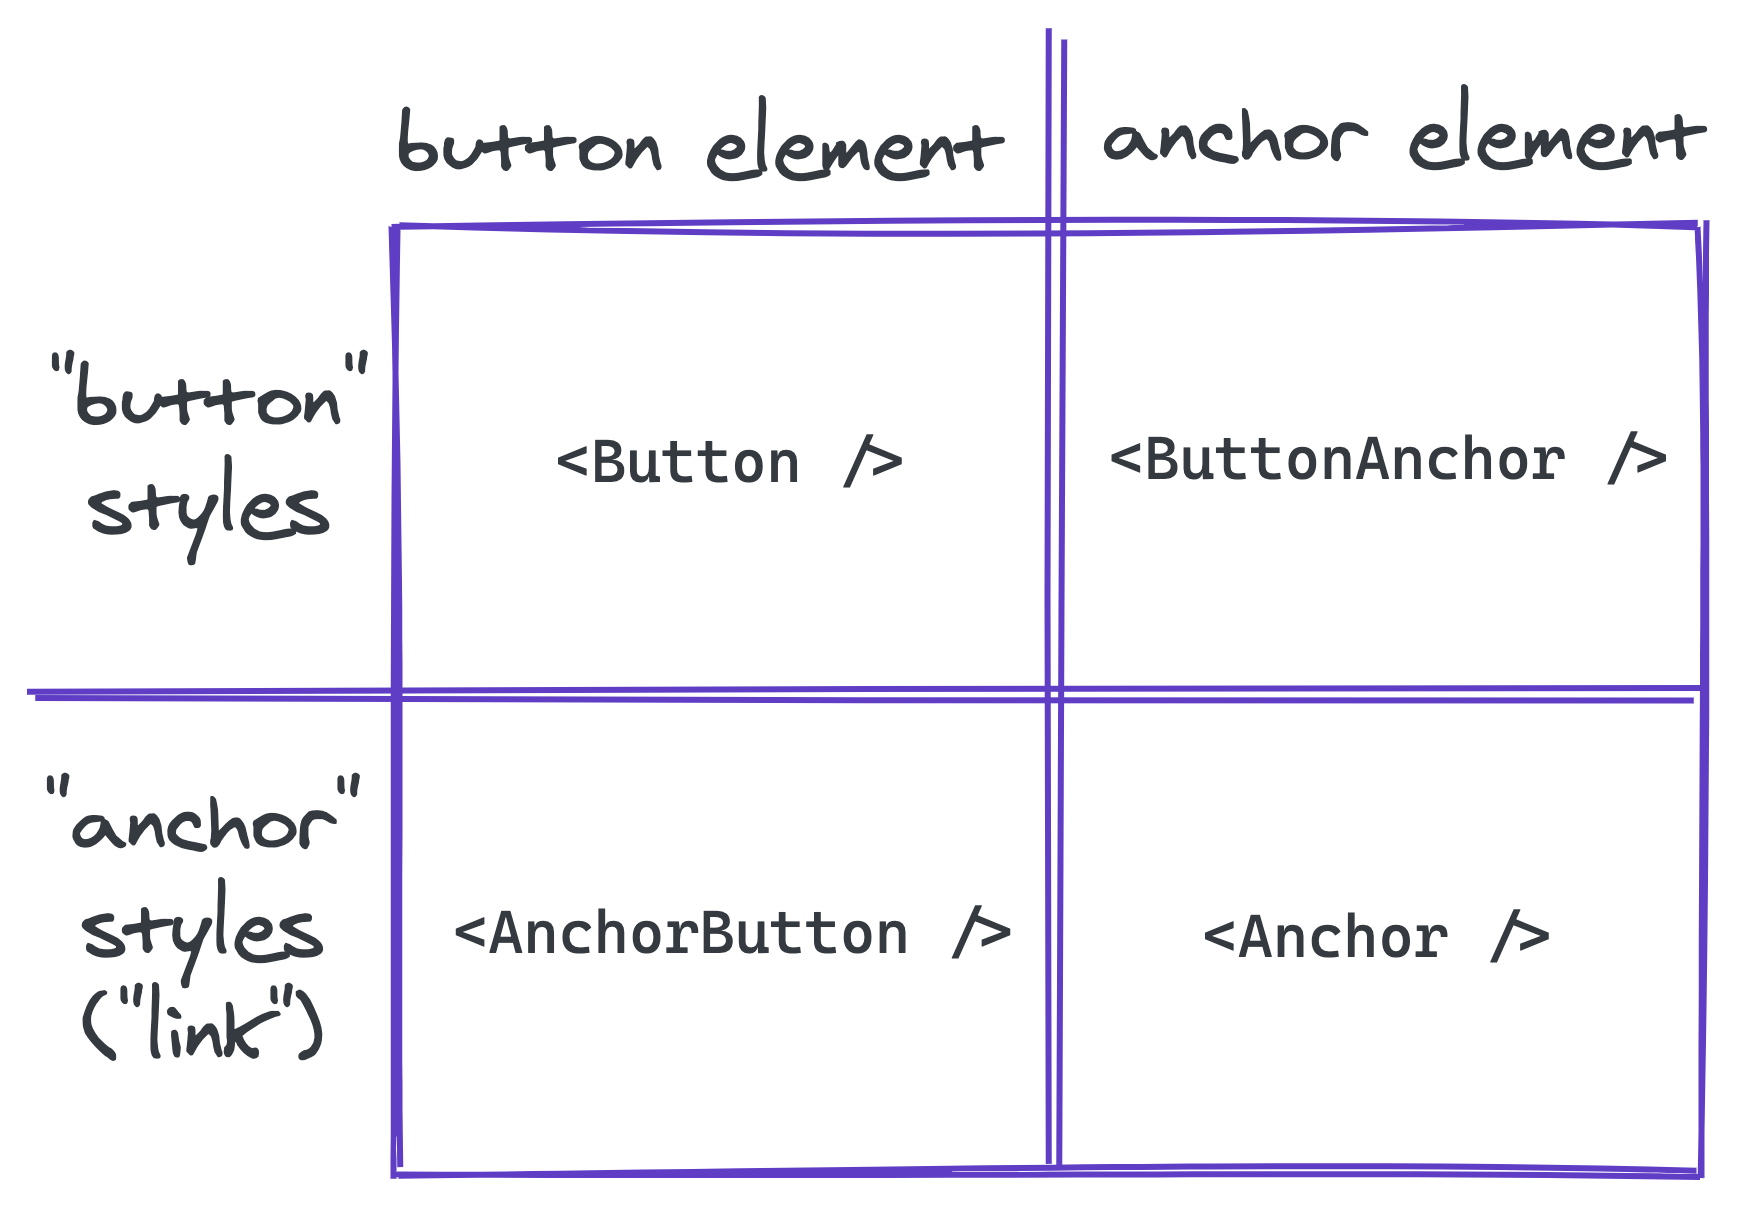 Example matrix of different styling and element combinations